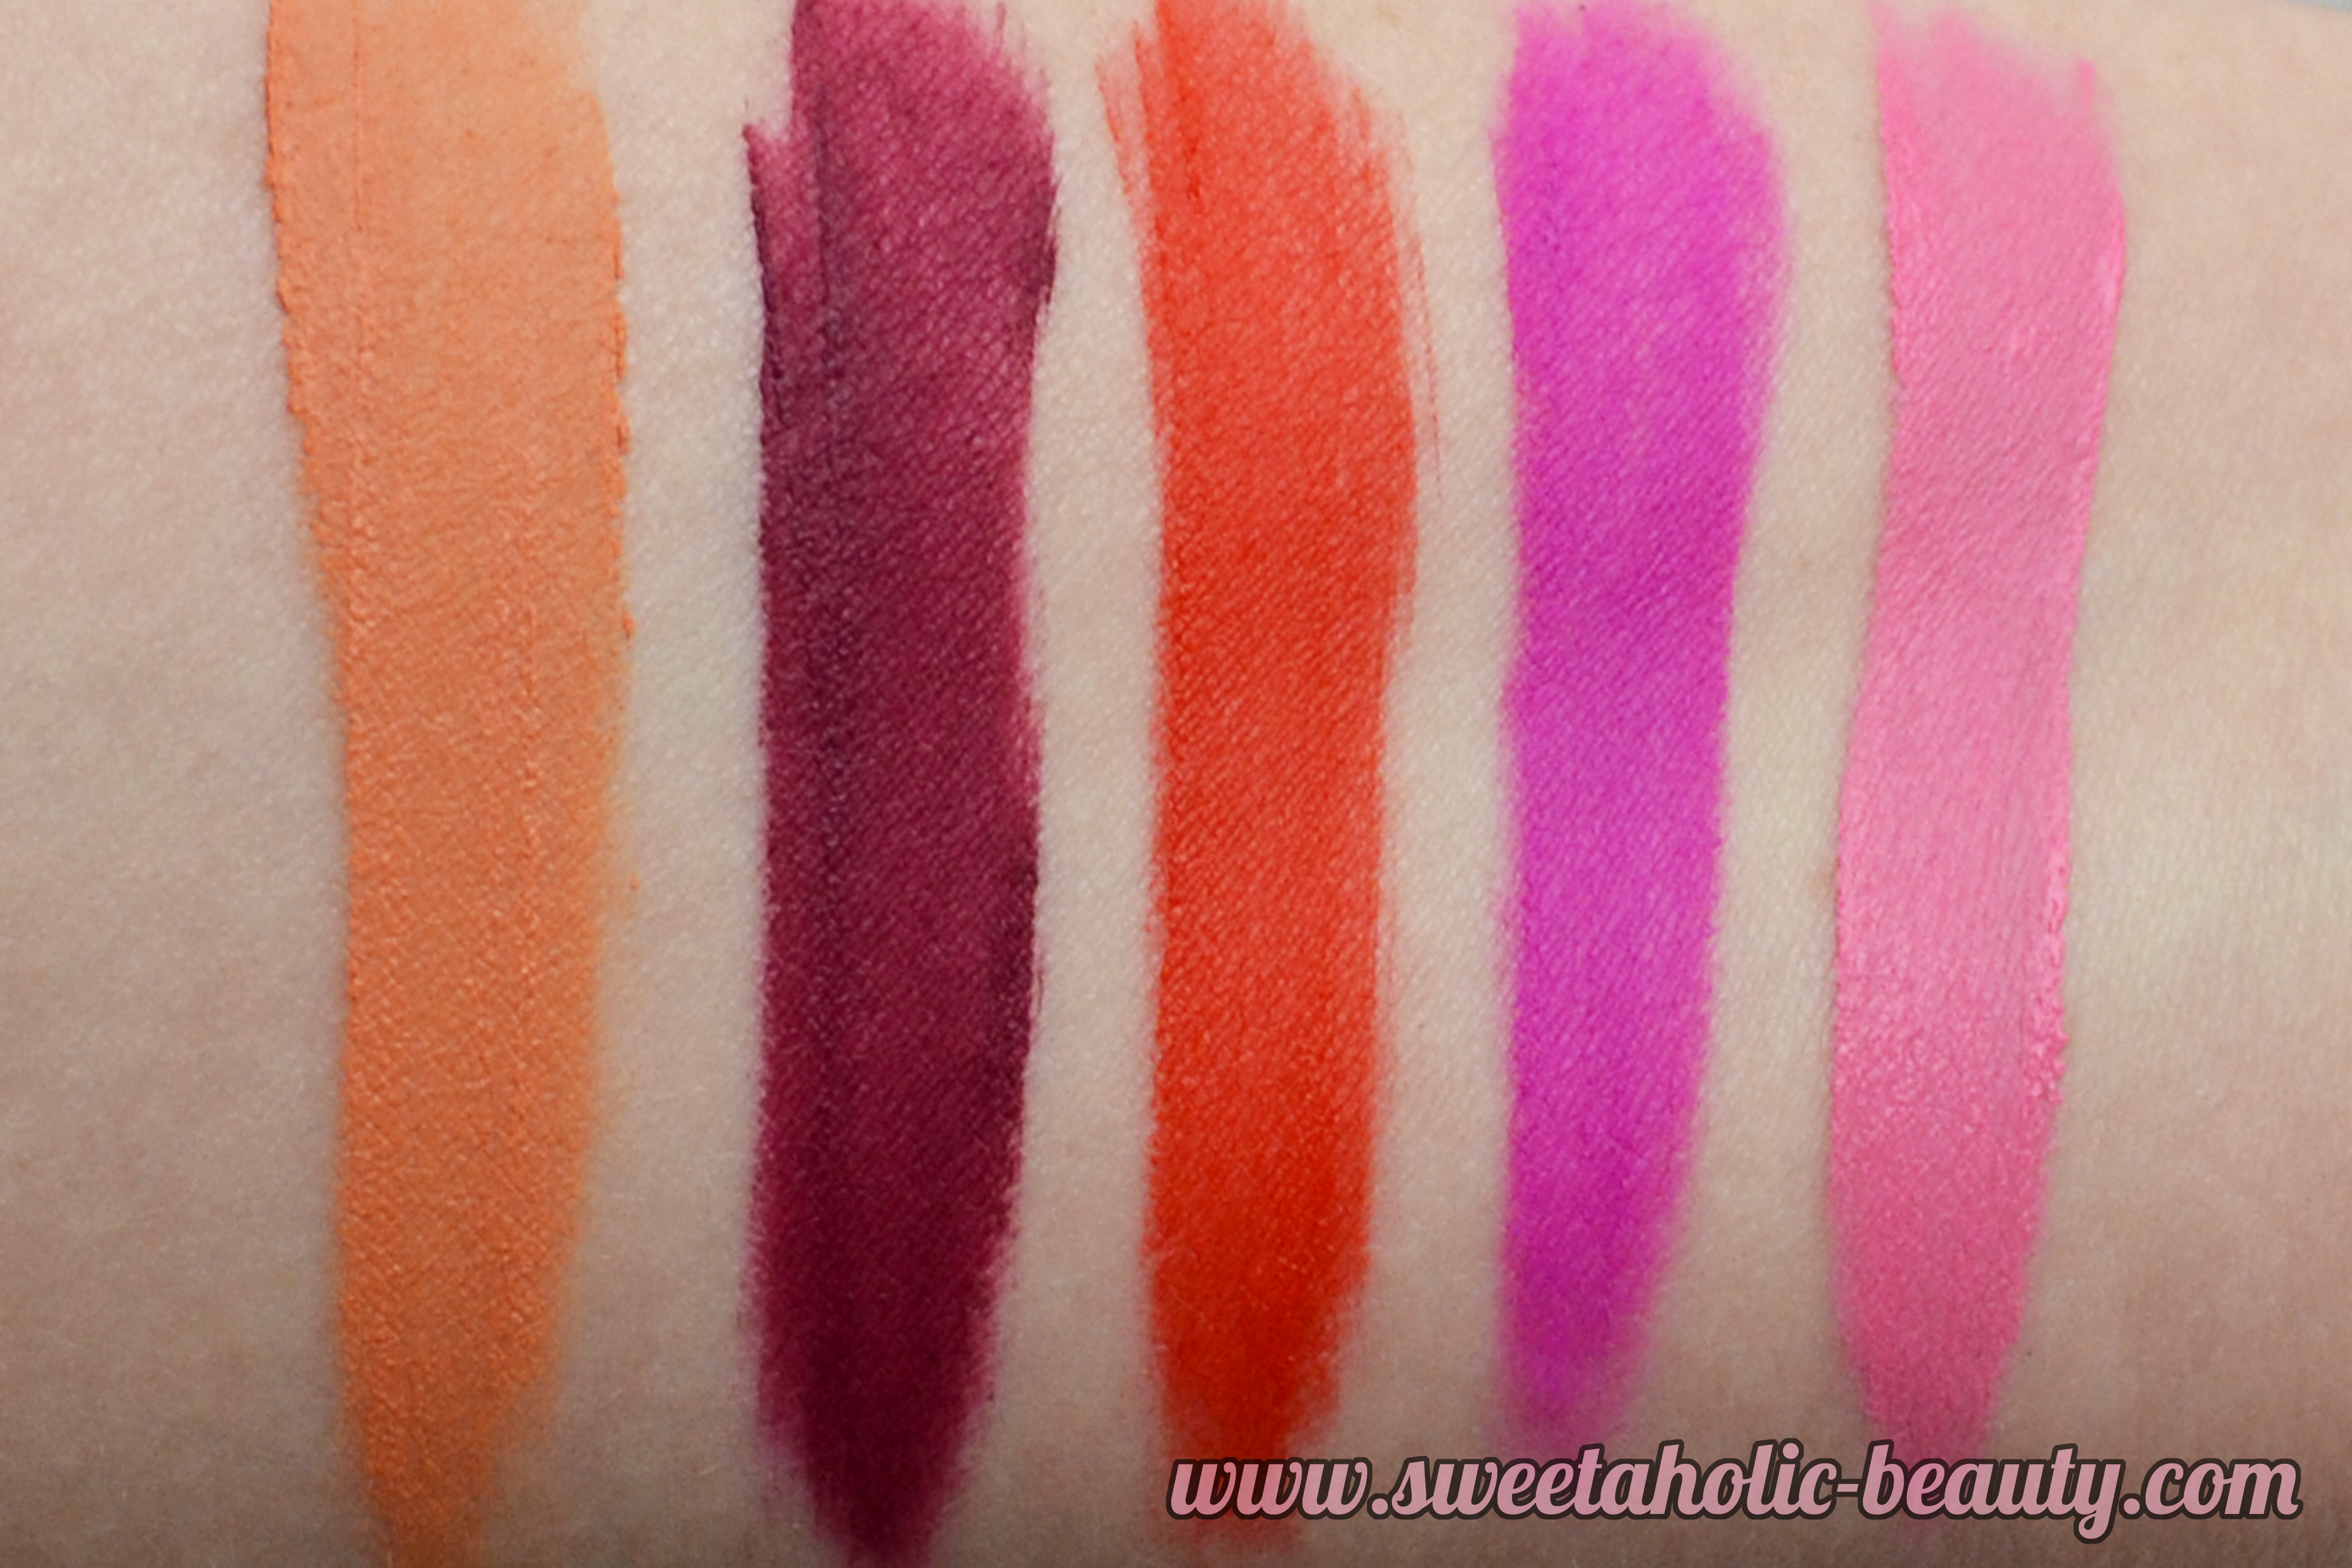 Ulta 3 Tribal Talk Collection Review & Swatches - Sweetaholic Beauty